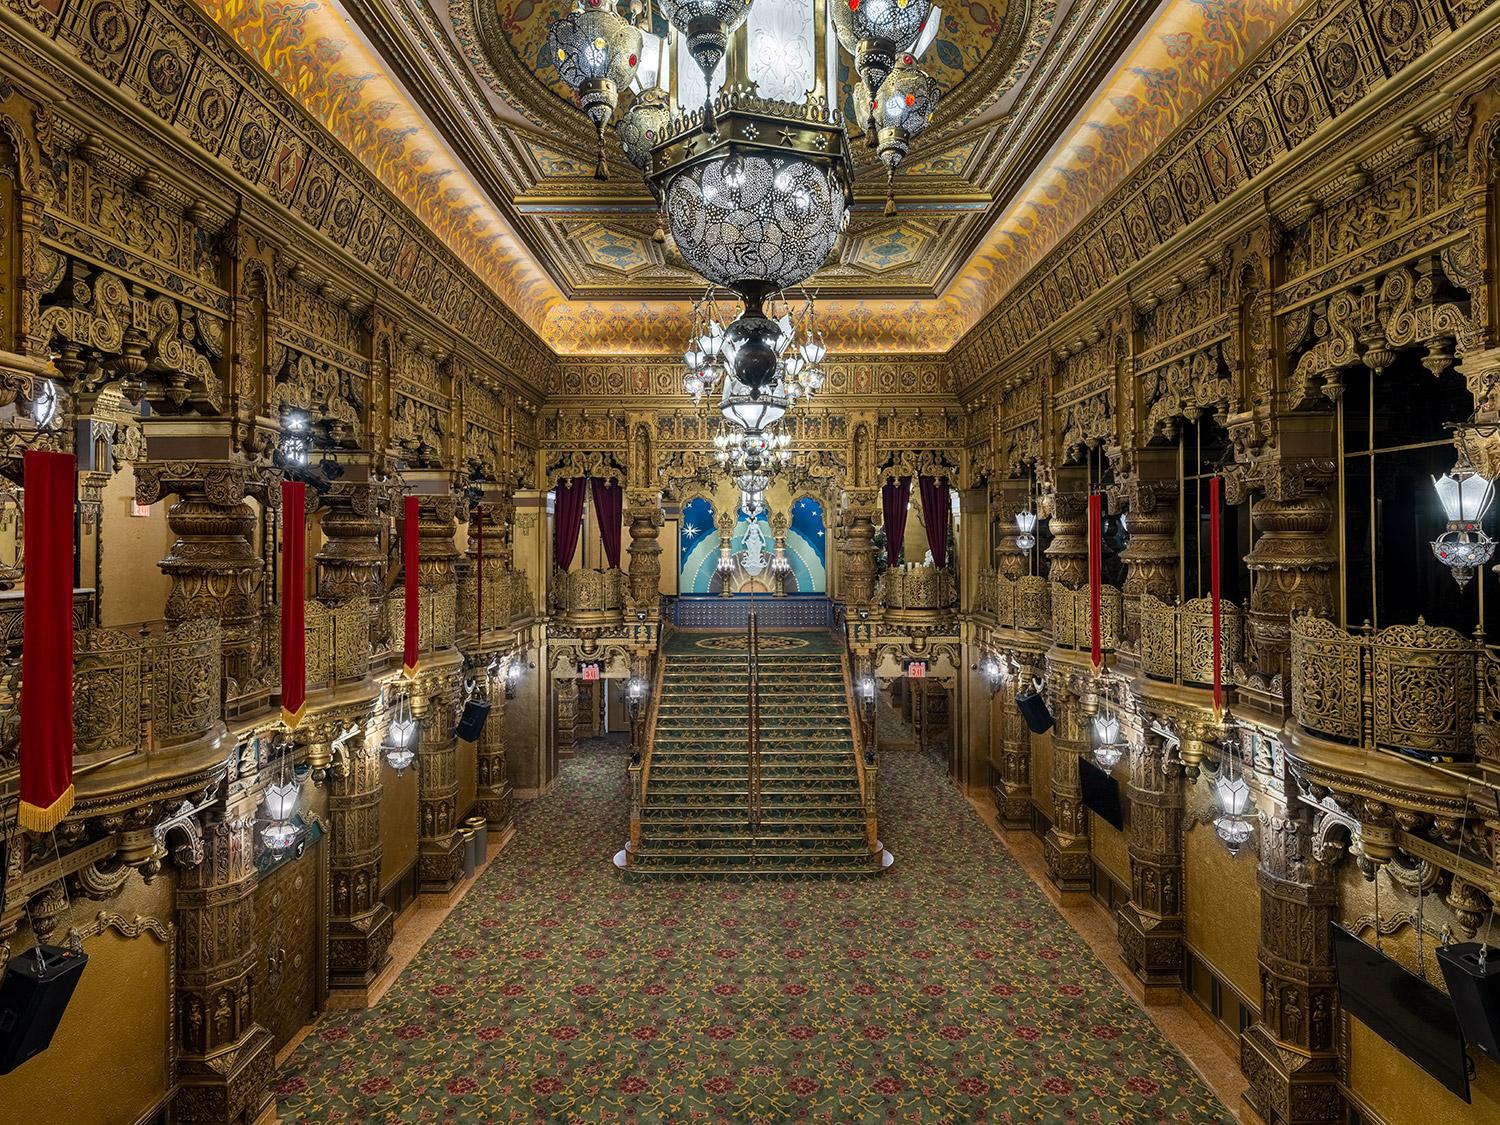 Title: Grand Lobby, United Palace Theatre, New York City

I was raised as a first-generation Greek-American, a son of immigrants. These two distinct and fascinating cultures forged my personal perspectives. Socioeconomics, cultural diversity,